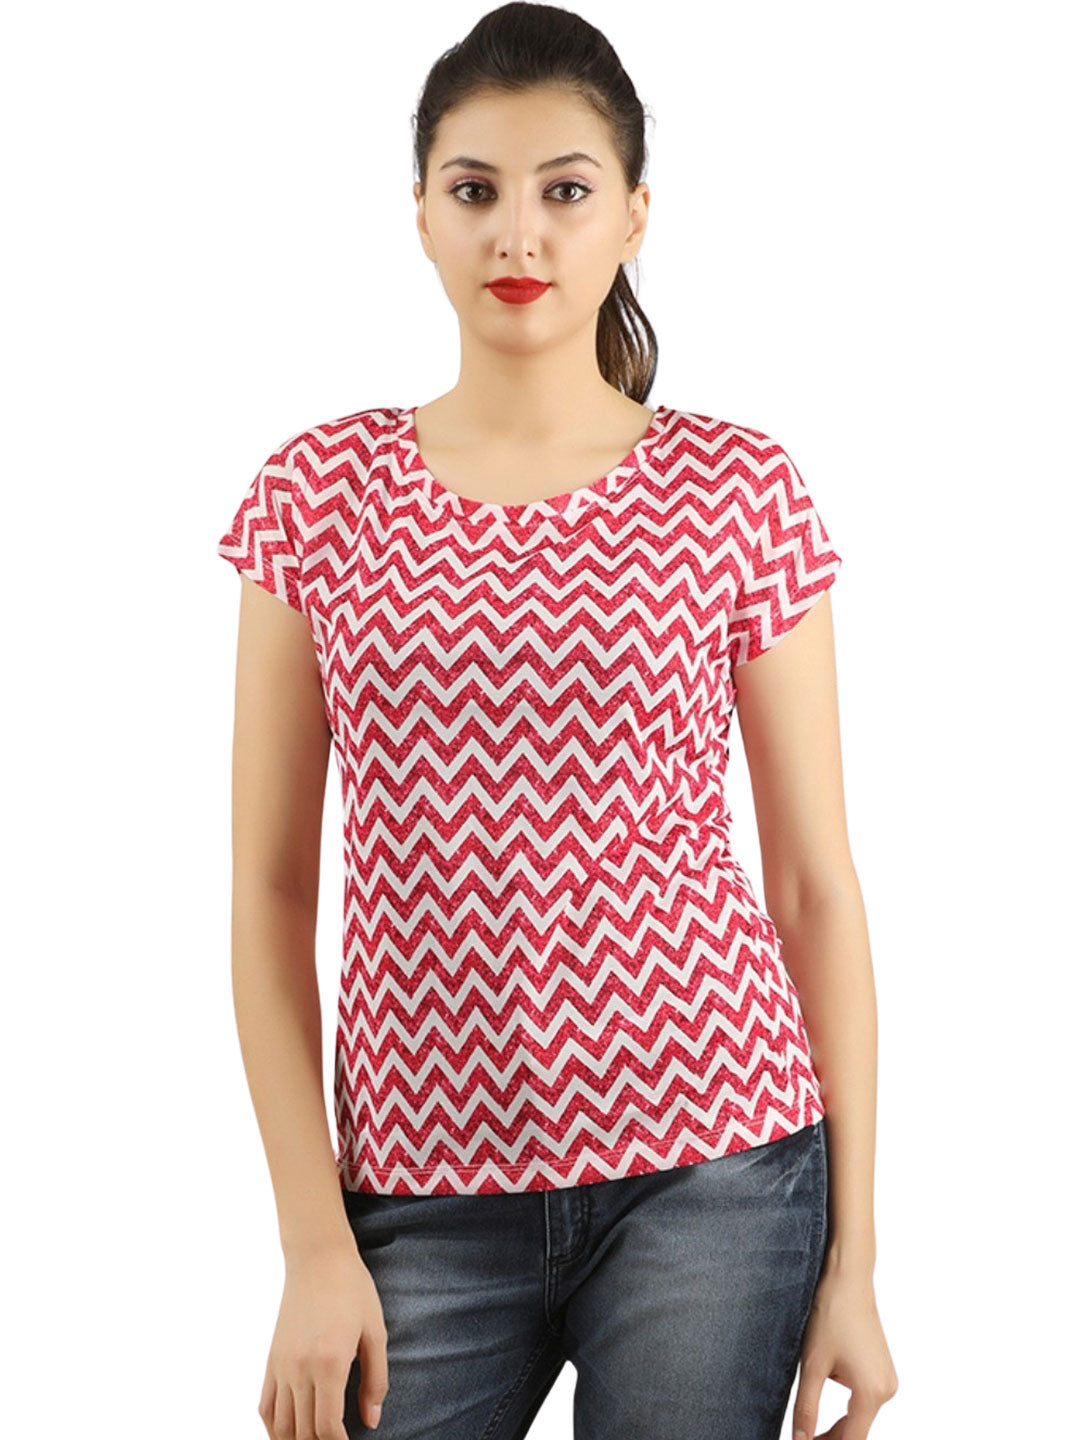 MARIA (100% POLYESTER REGULAR FIT CASUAL TOP FOR WOMENS)